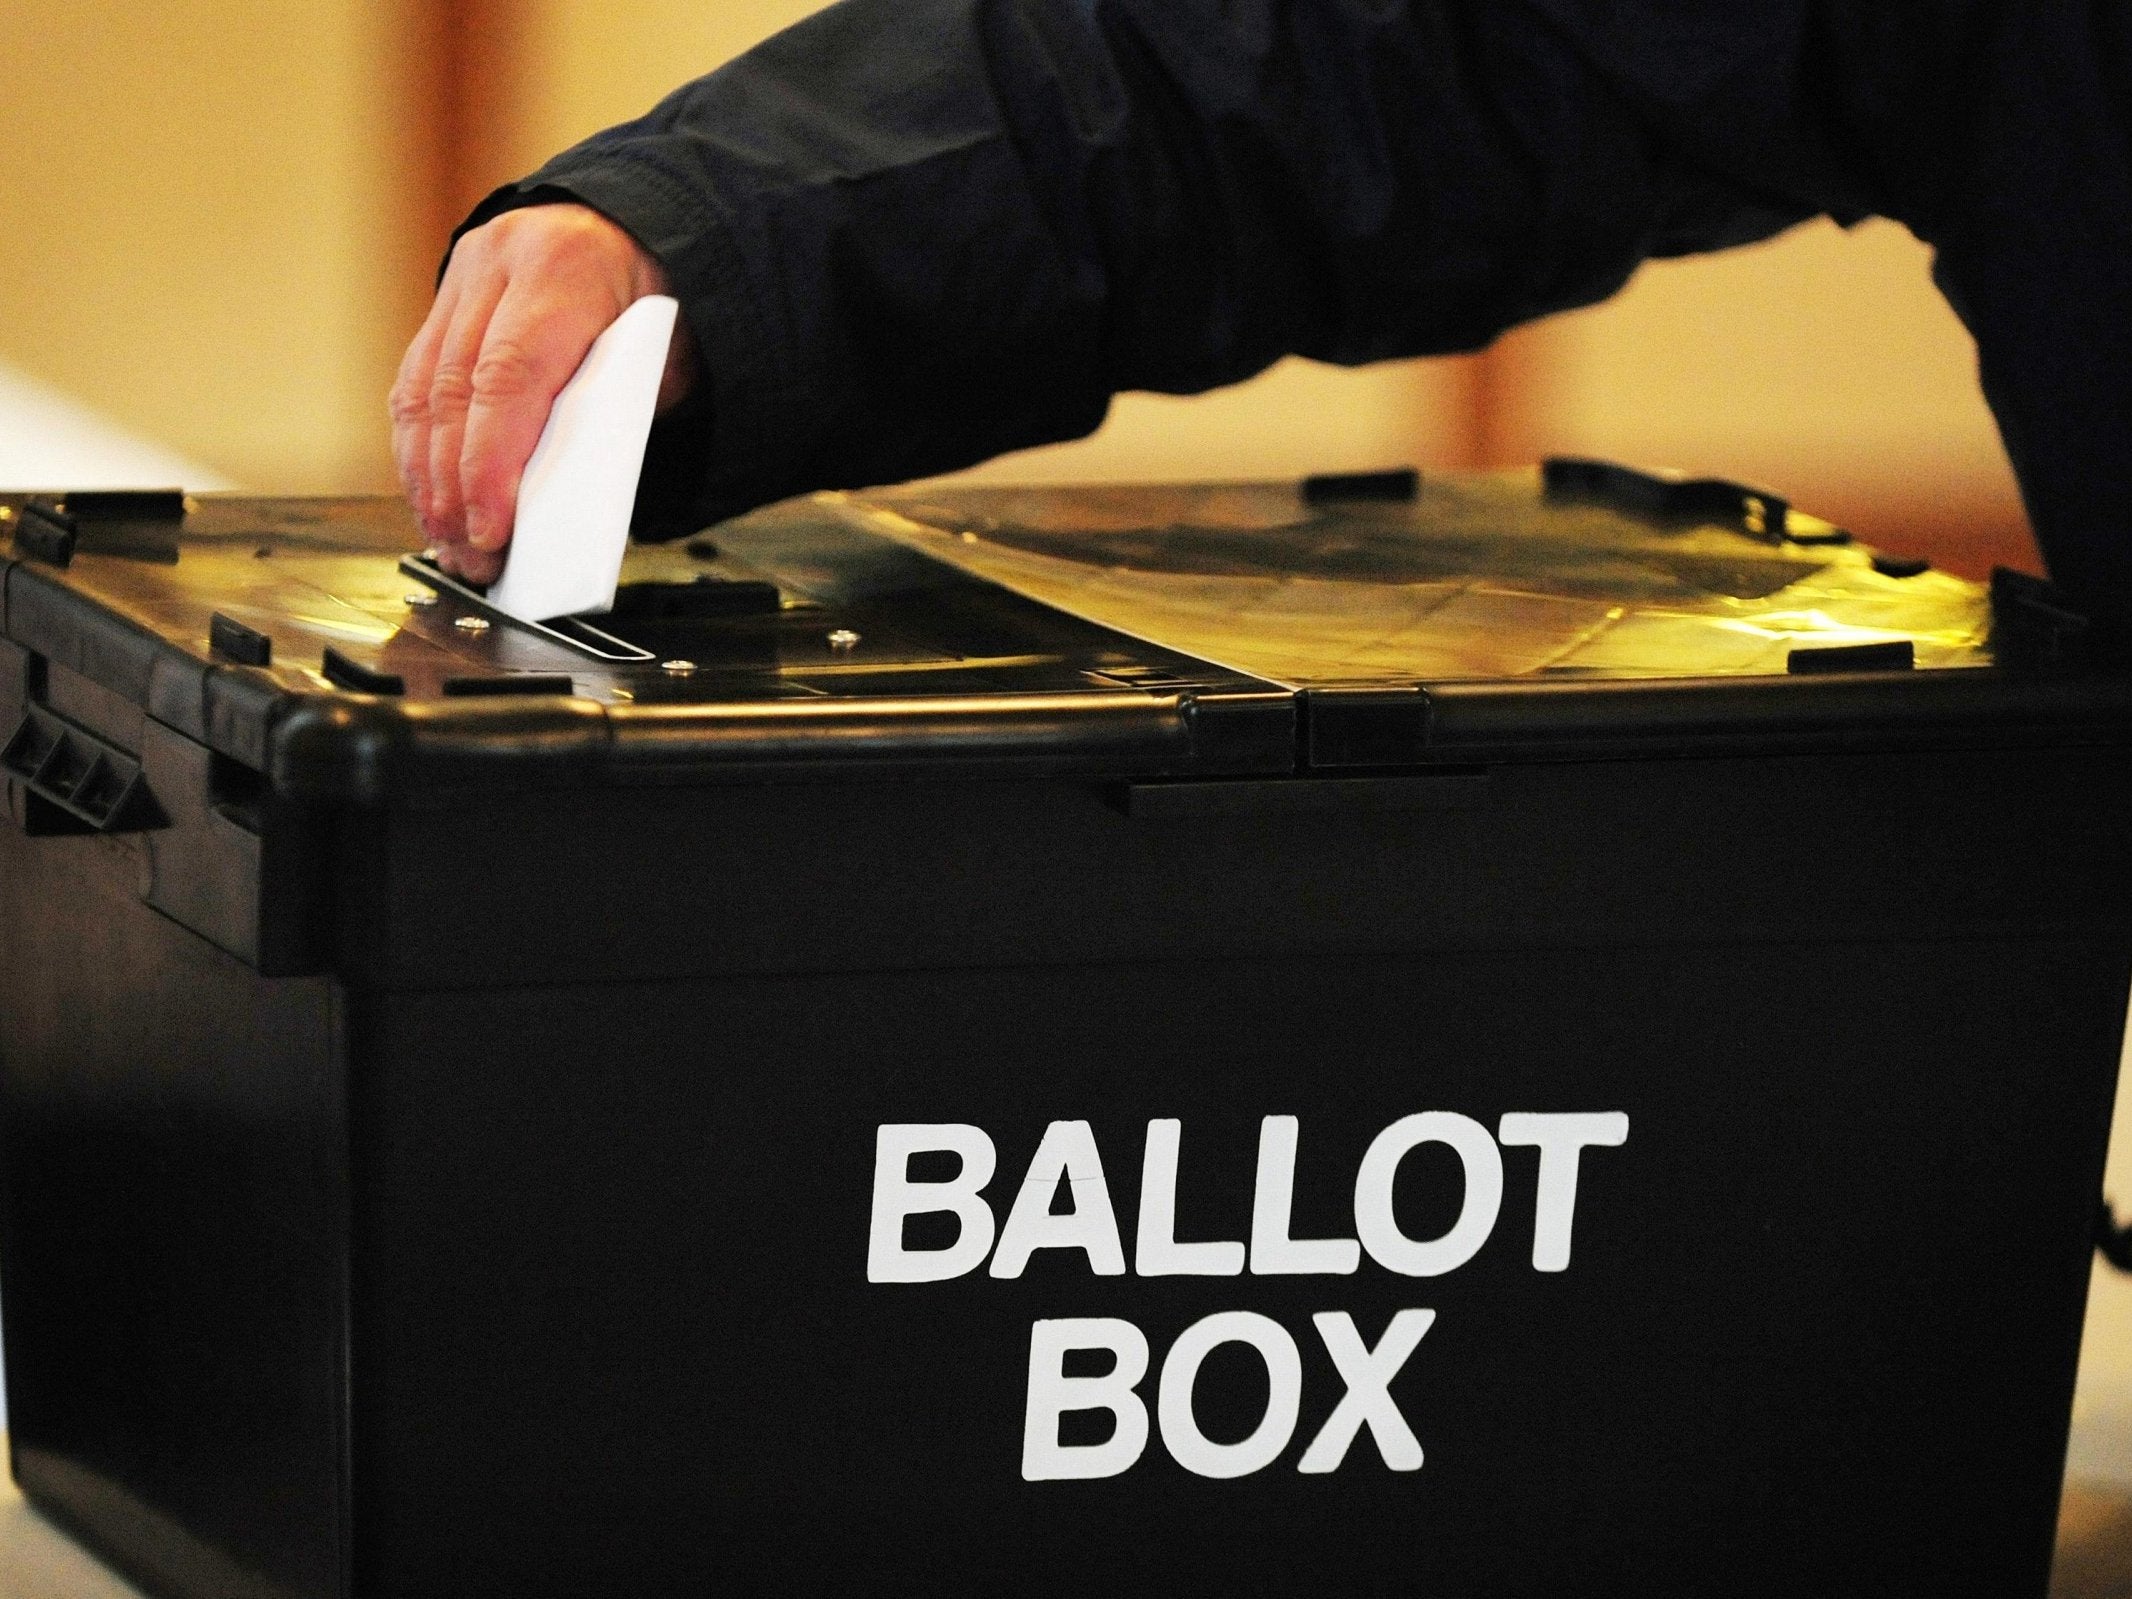 The Electoral Commission is seeking to give itself more powers of investigation